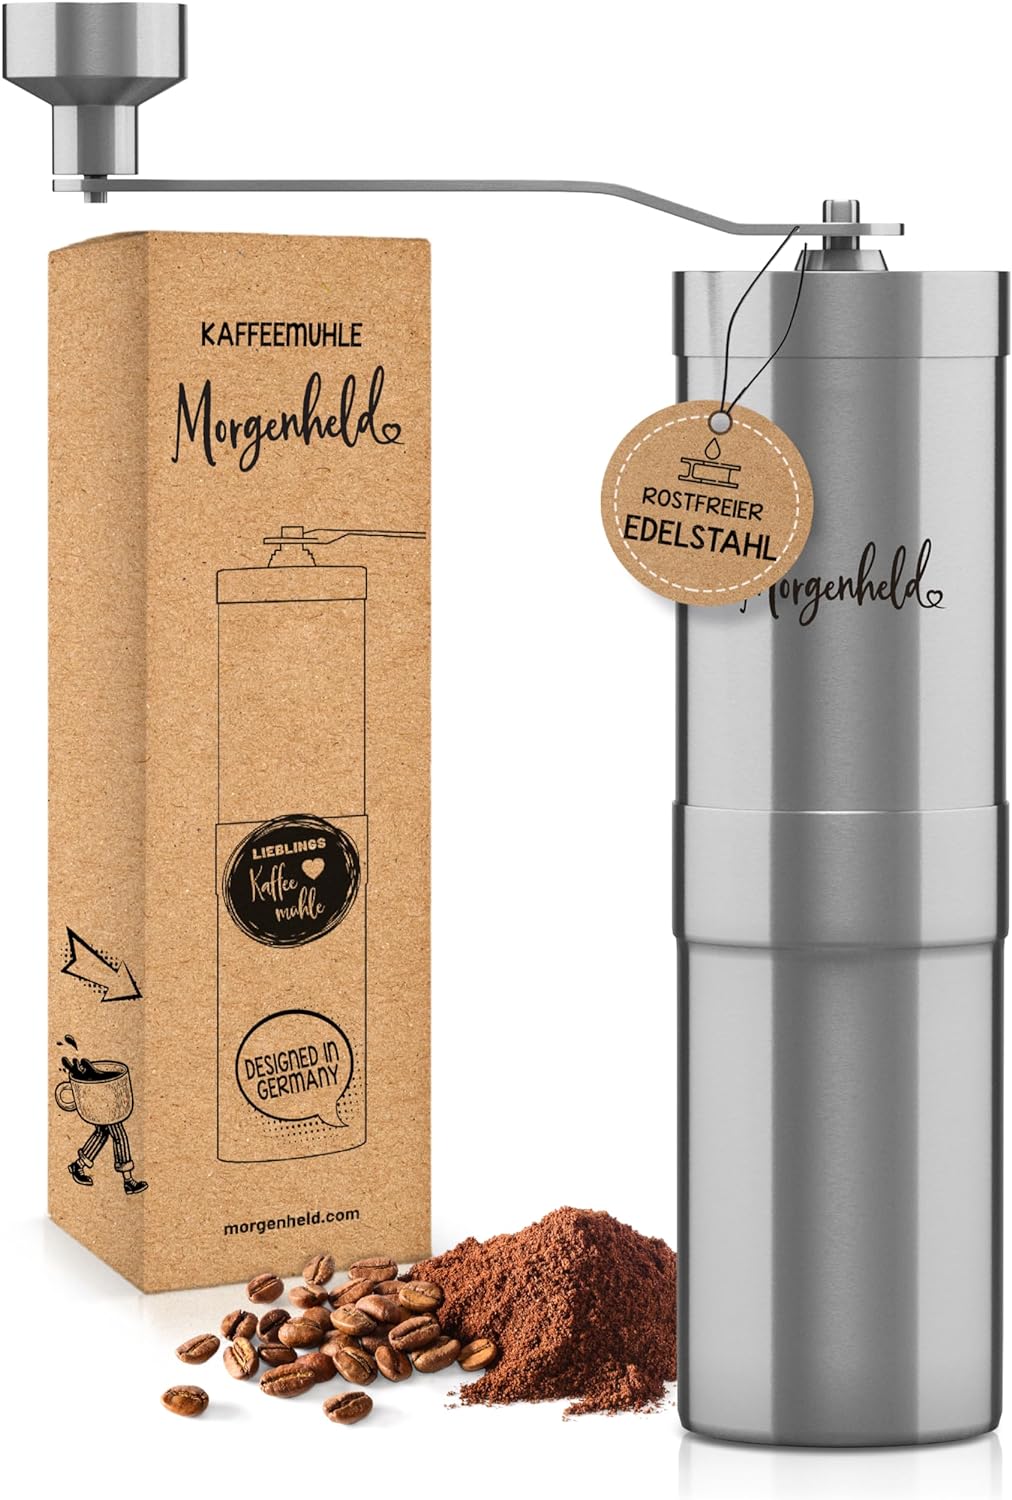 Morgenheld Manual Coffee Grinder with Continuous Ceramic Grinder - Coffee Grinder Conical Grinder Made of Stainless Steel, Hand Coffee Grinder for All Coffee Preparation Types